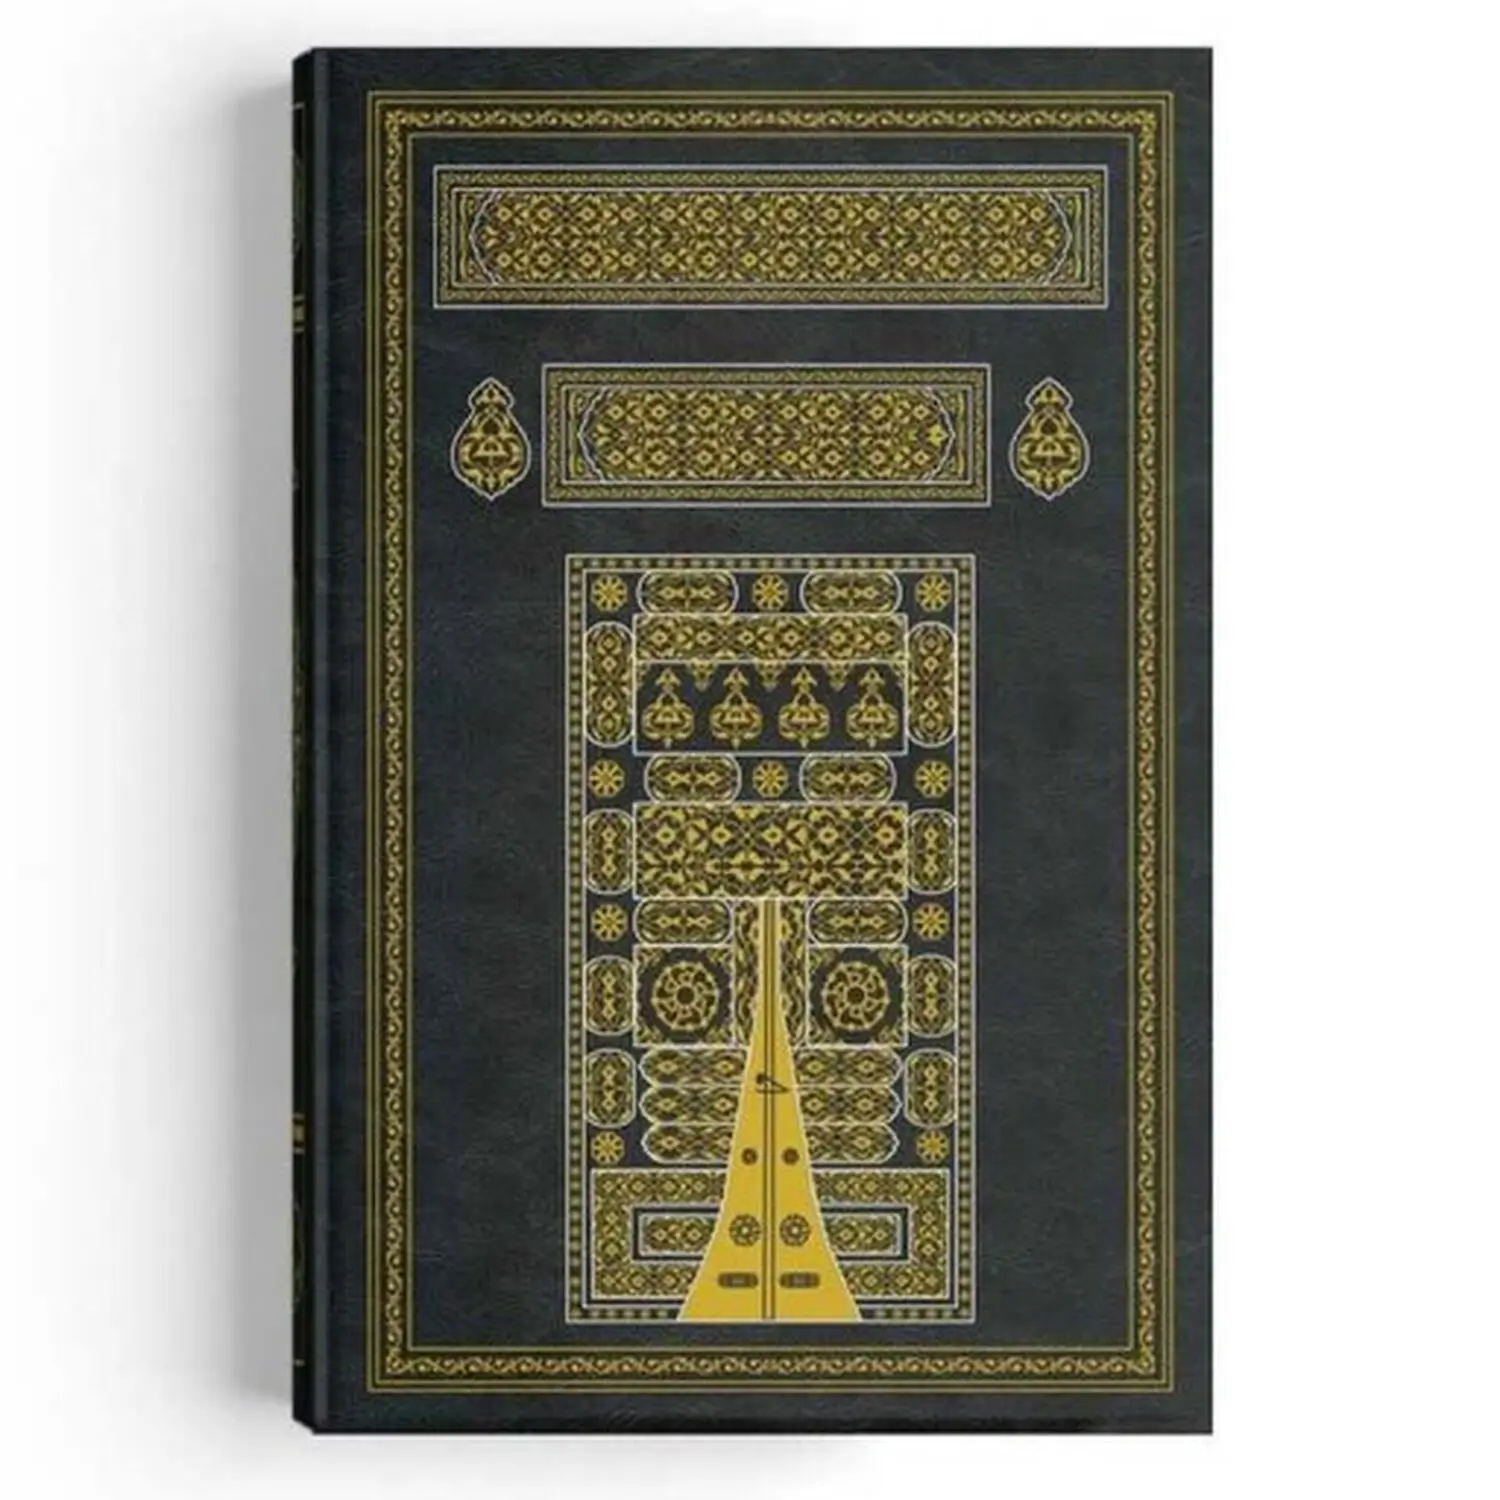 the-holy-quran-with-kaaba-cover-rahle-size-2-colors-large-written-easy-to-read-color-printed-religious-book